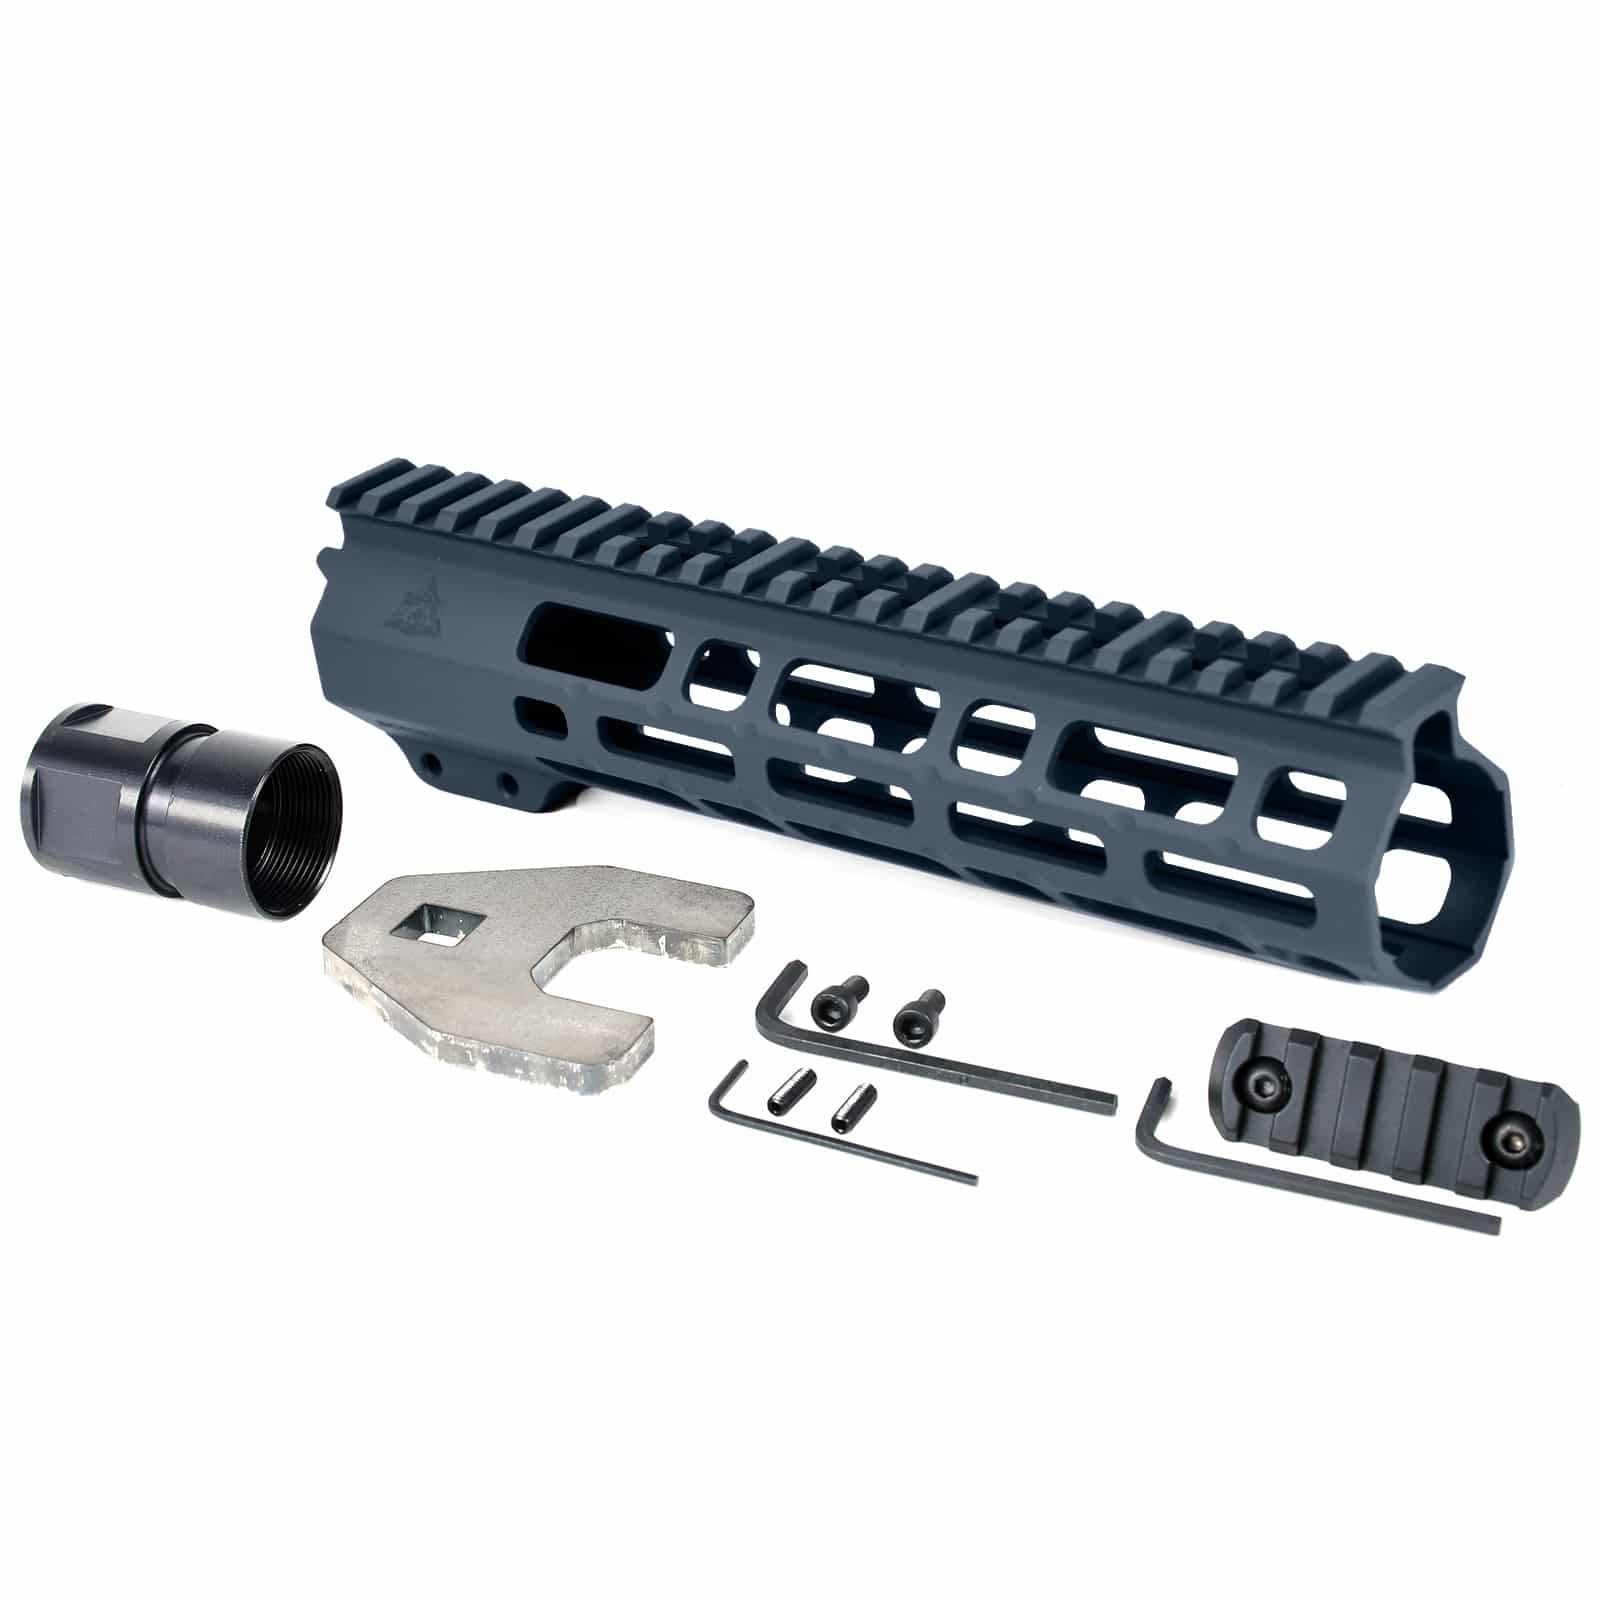 AT3 Tactical SPEAR M-LOK Handguard - 9 Inch Stealth Grey